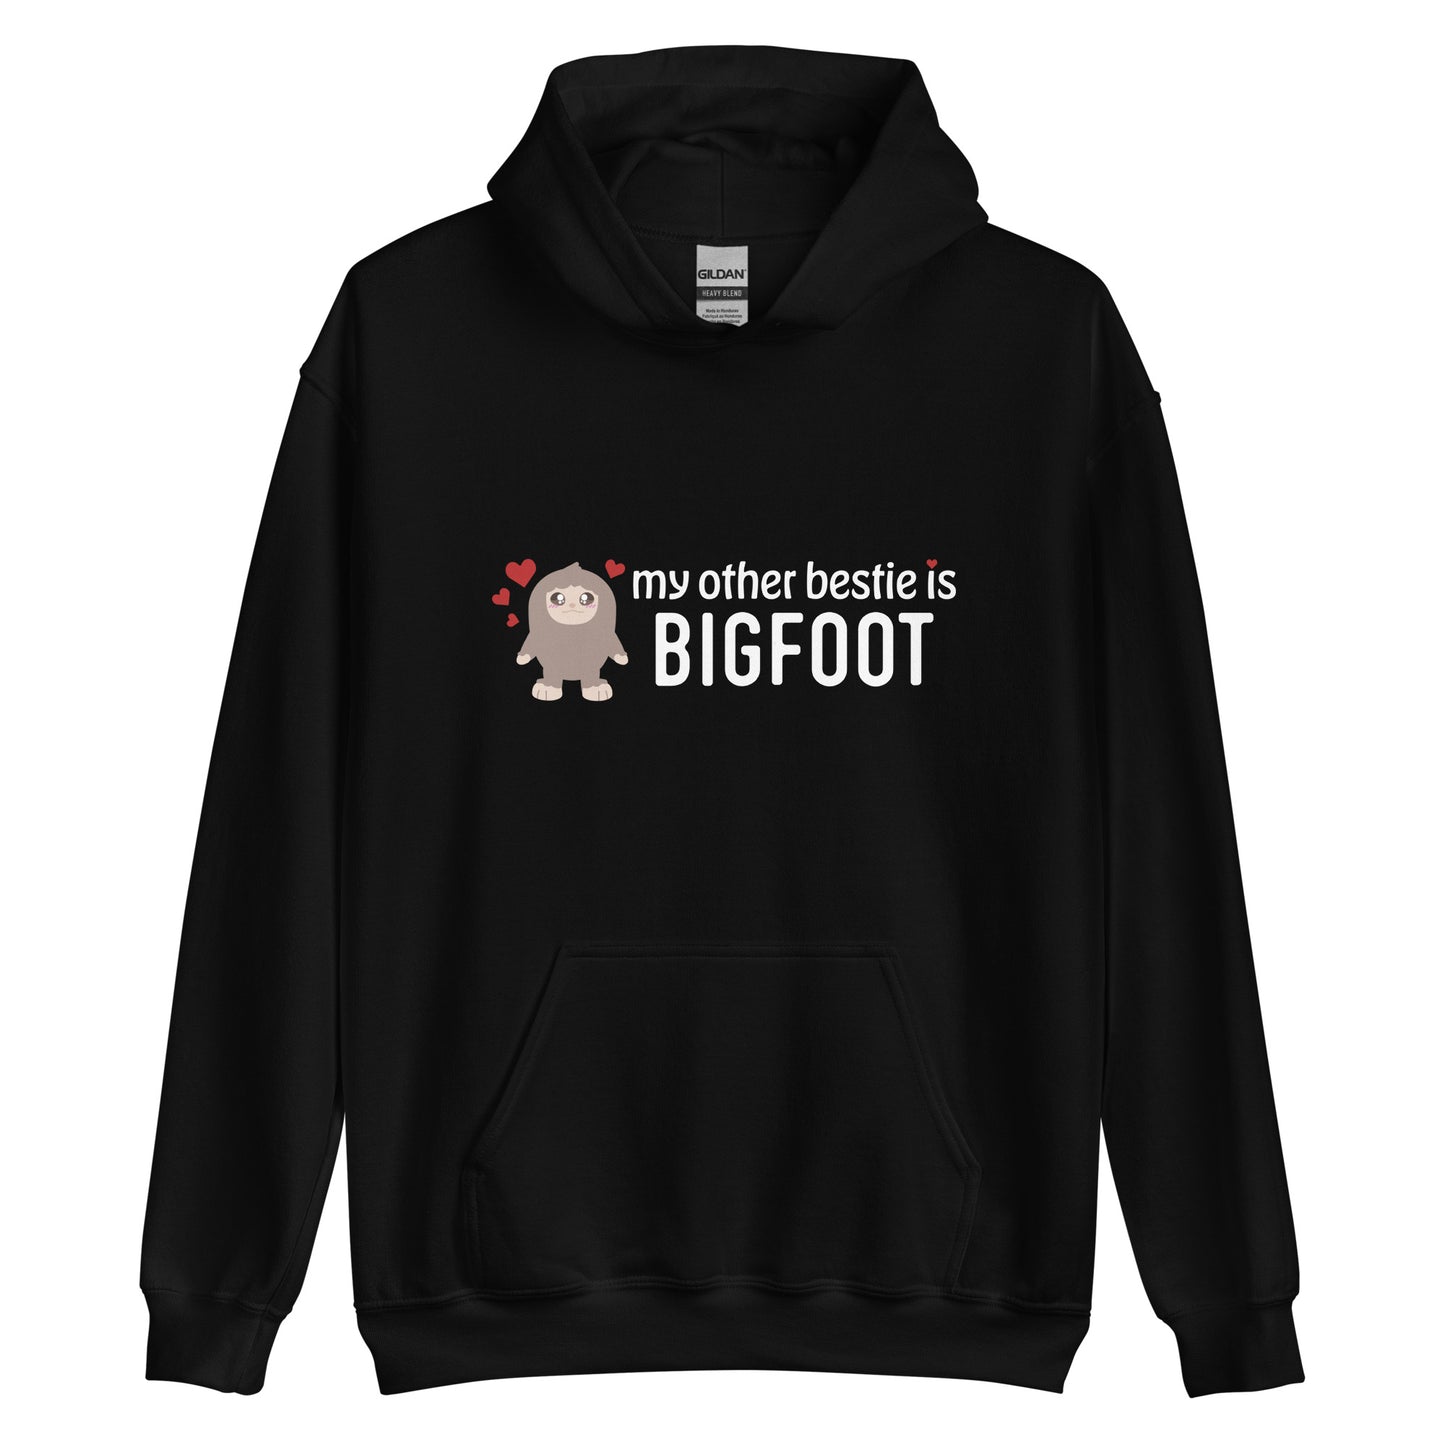 A black hooded sweatshirt featuring a cutesy illustration of Bigfoot surrounded by hearts. Text next to Bigfoot reads "my other bestie is Bigfoot"